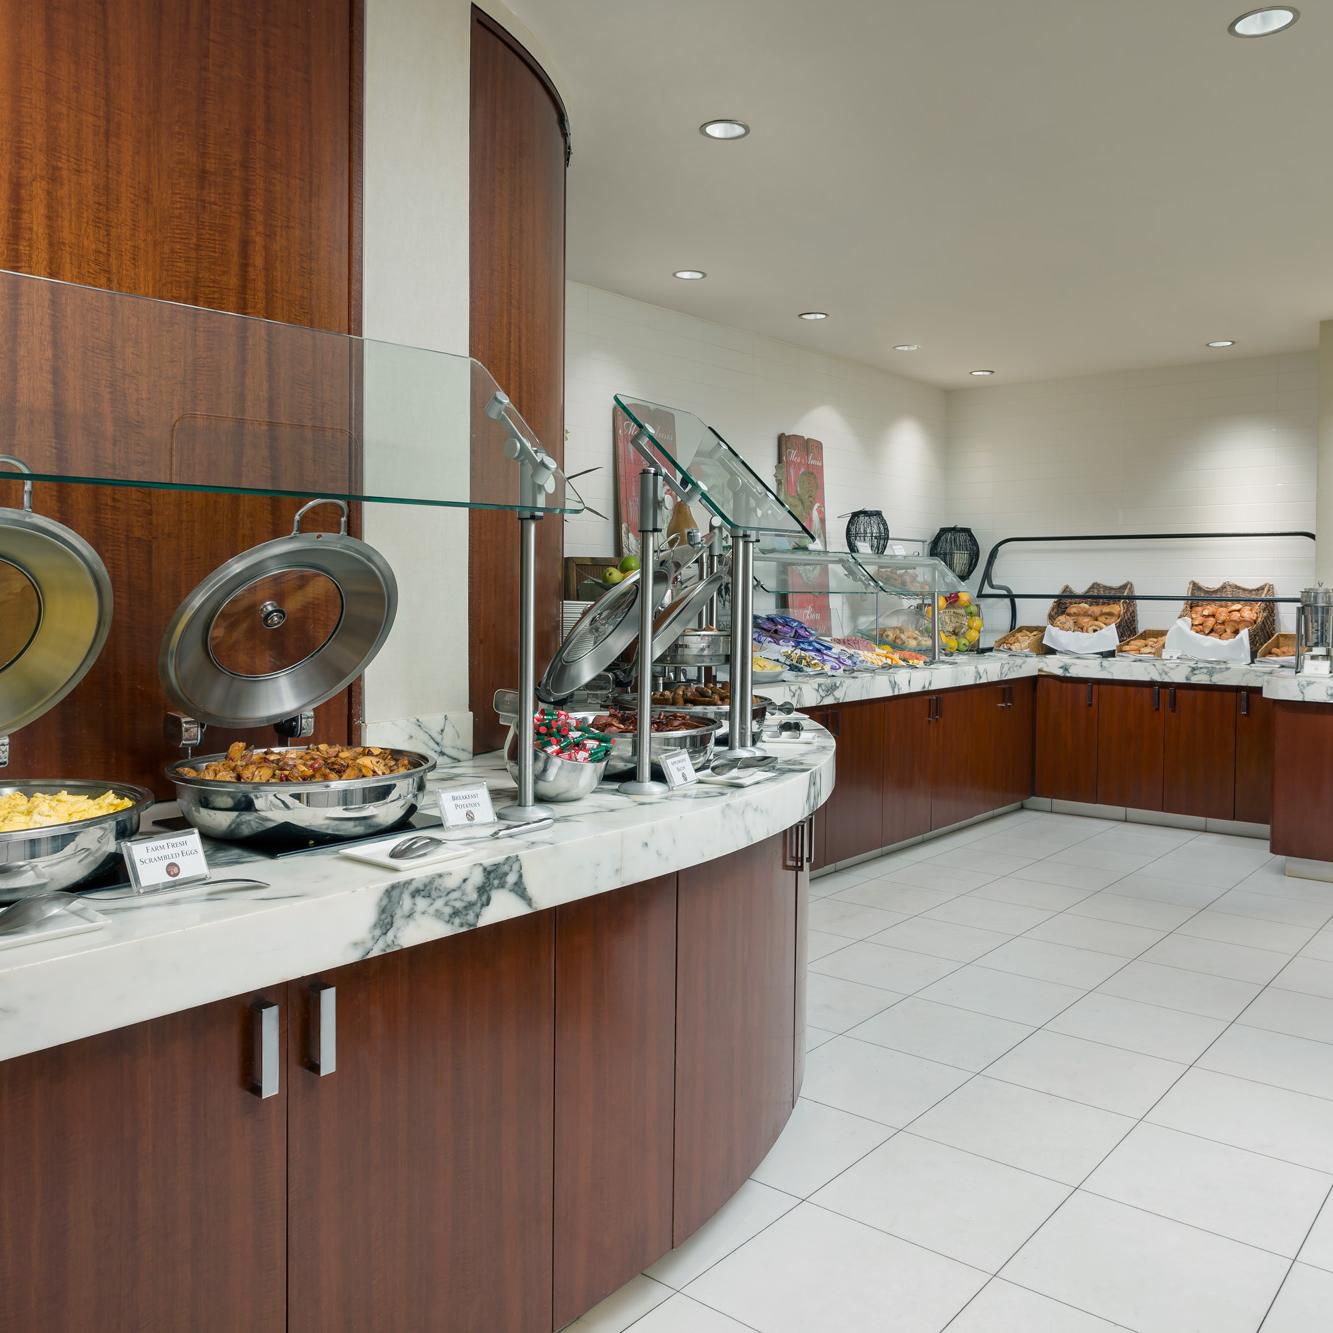 Breakfast Buffet with a large selection of hot and cold items